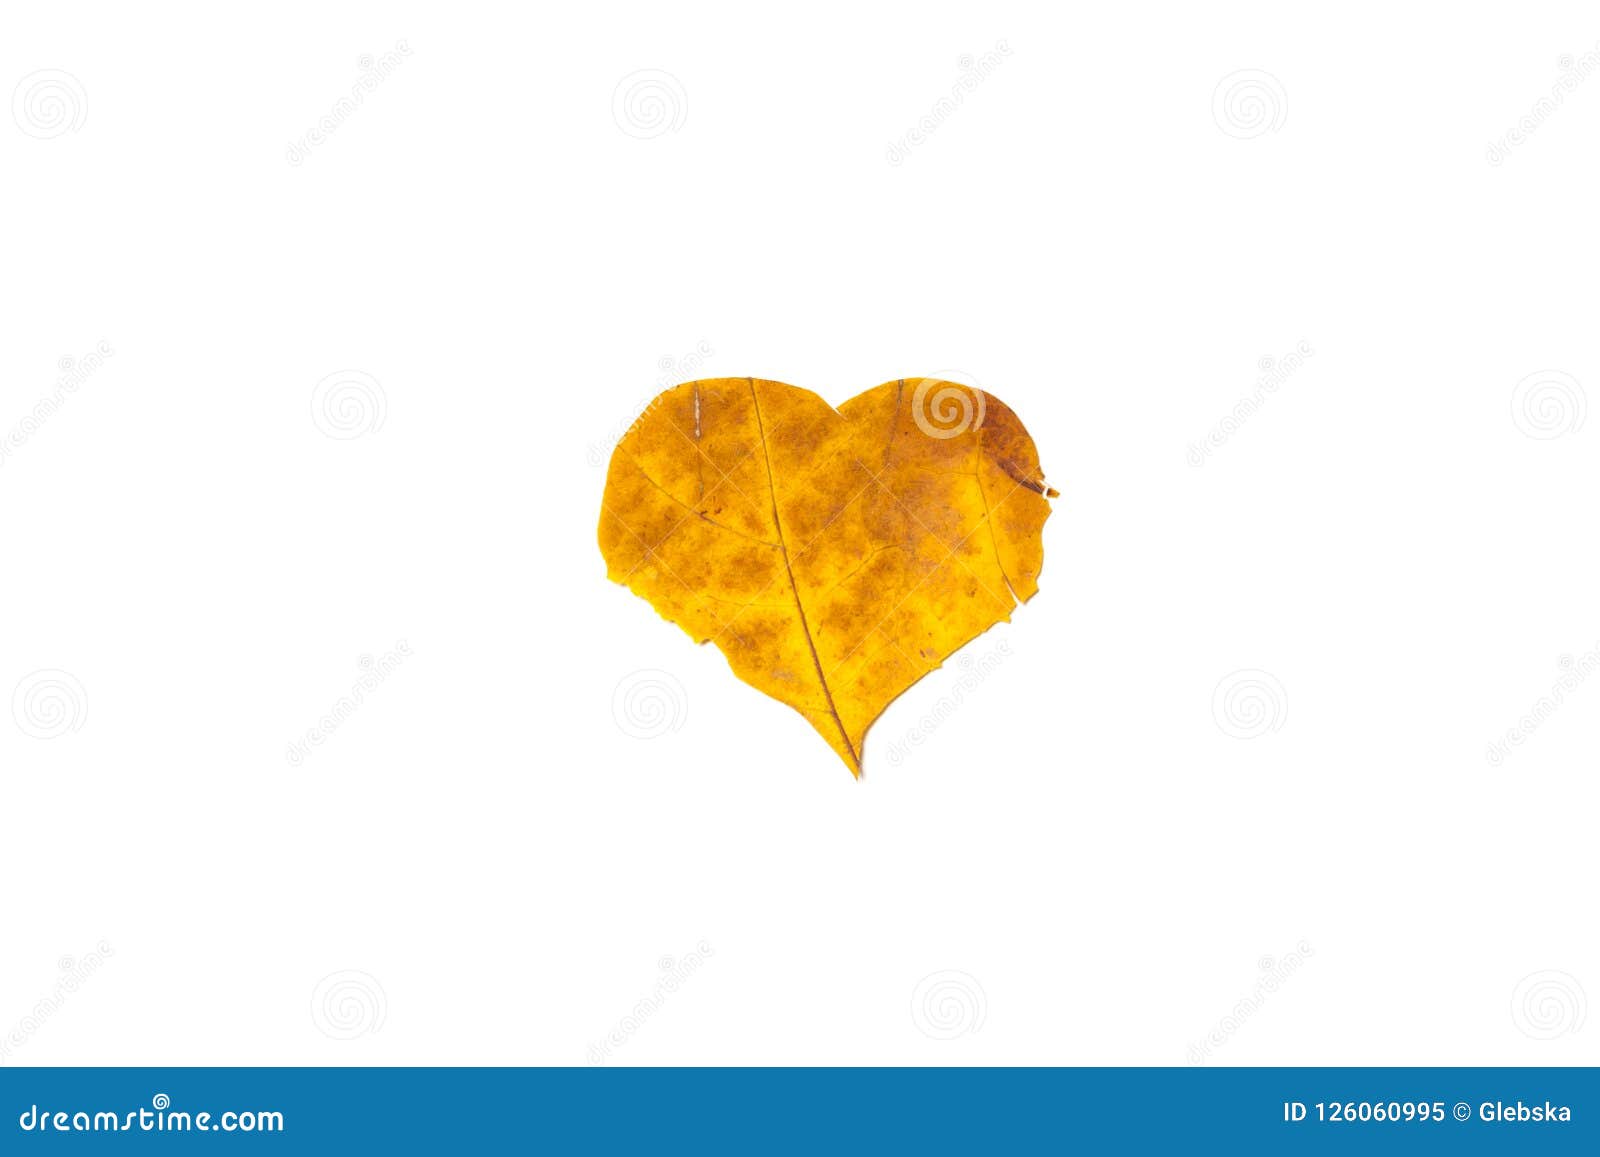 Heart Symbol is Carved from Yellow Maple Leaf Stock Image - Image of ...